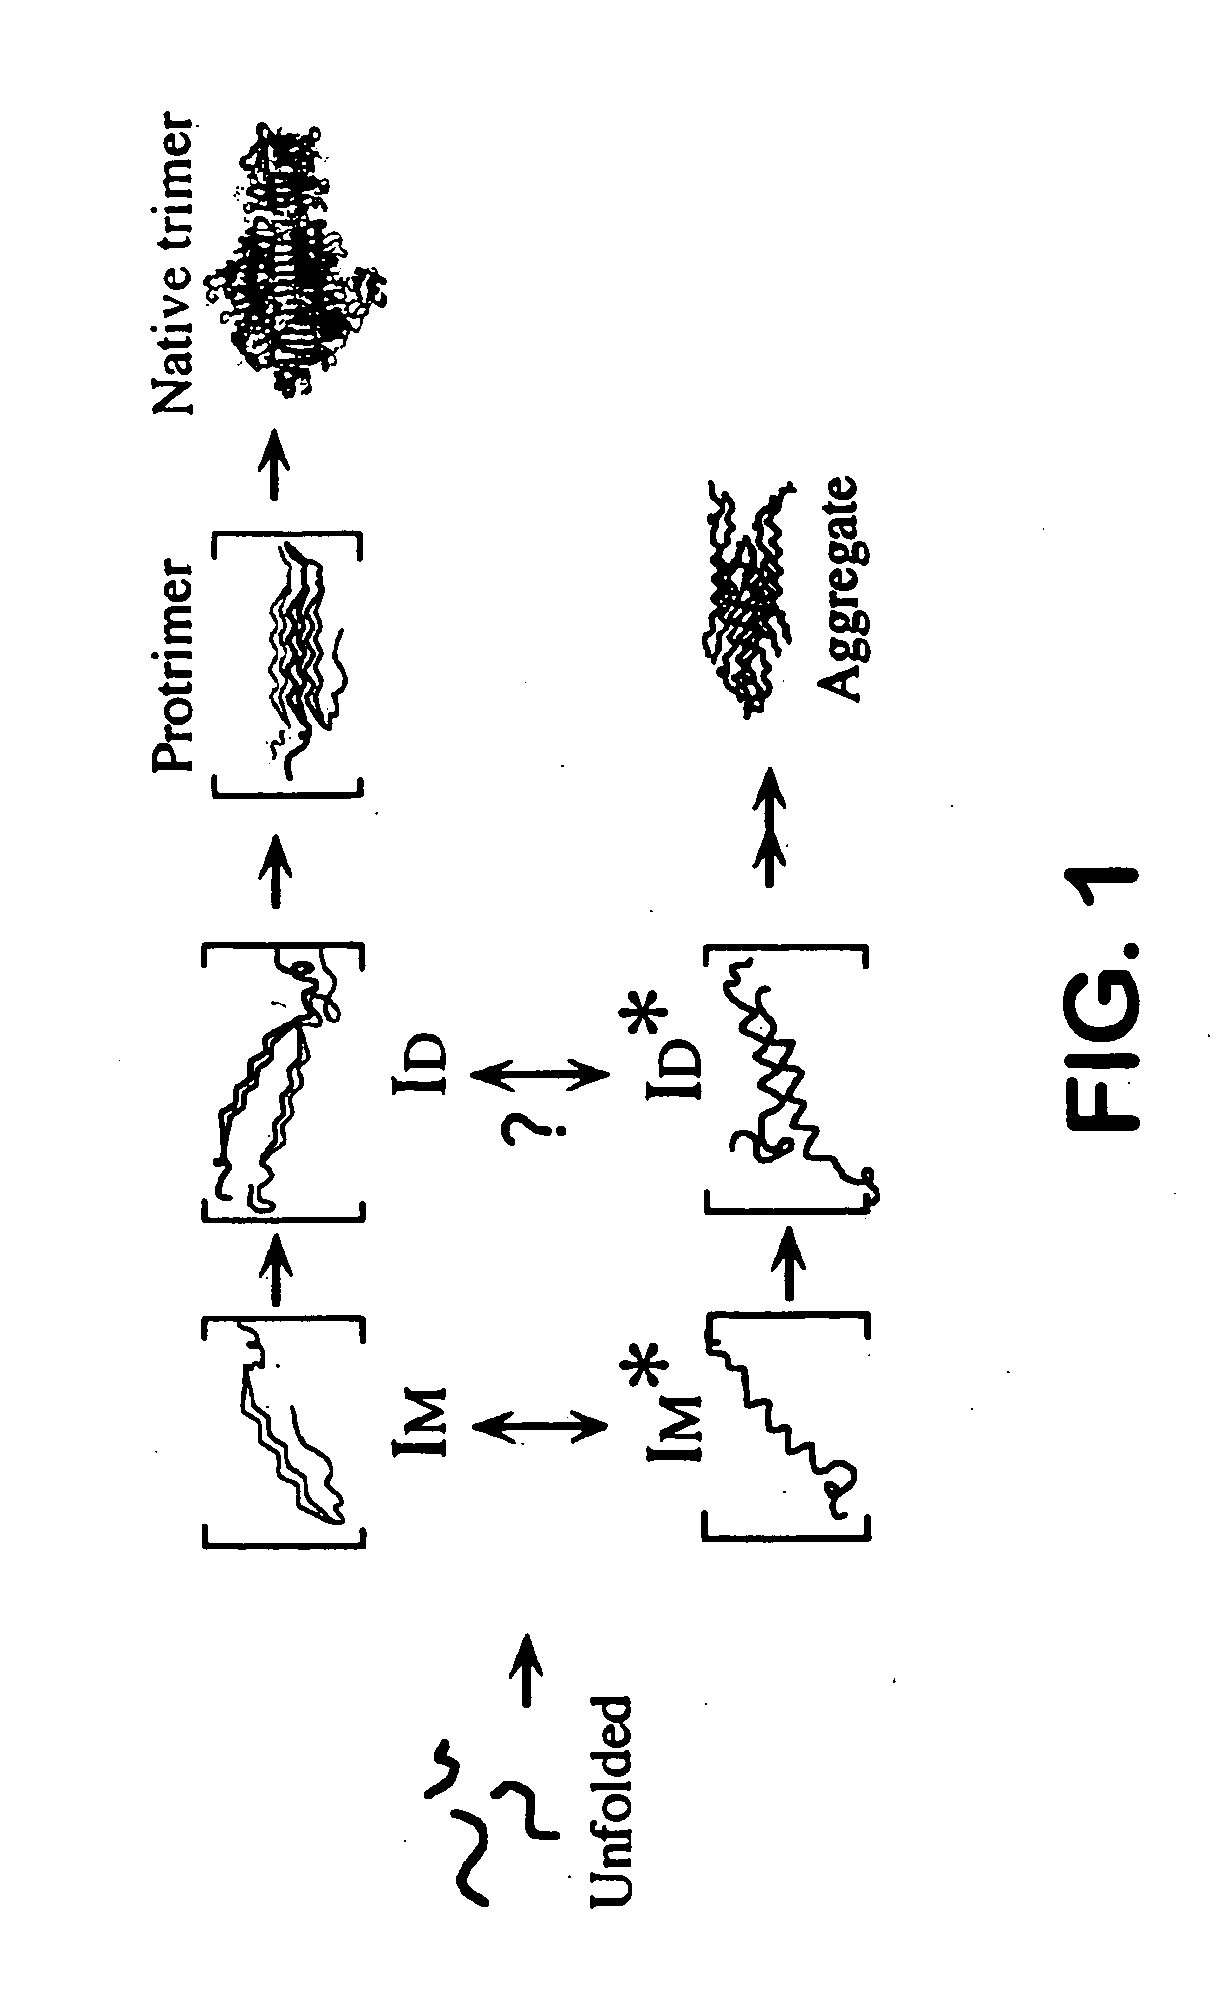 Use of hydrostatic pressure to inhibit and reverse protein aggregation and facilitate protein refolding